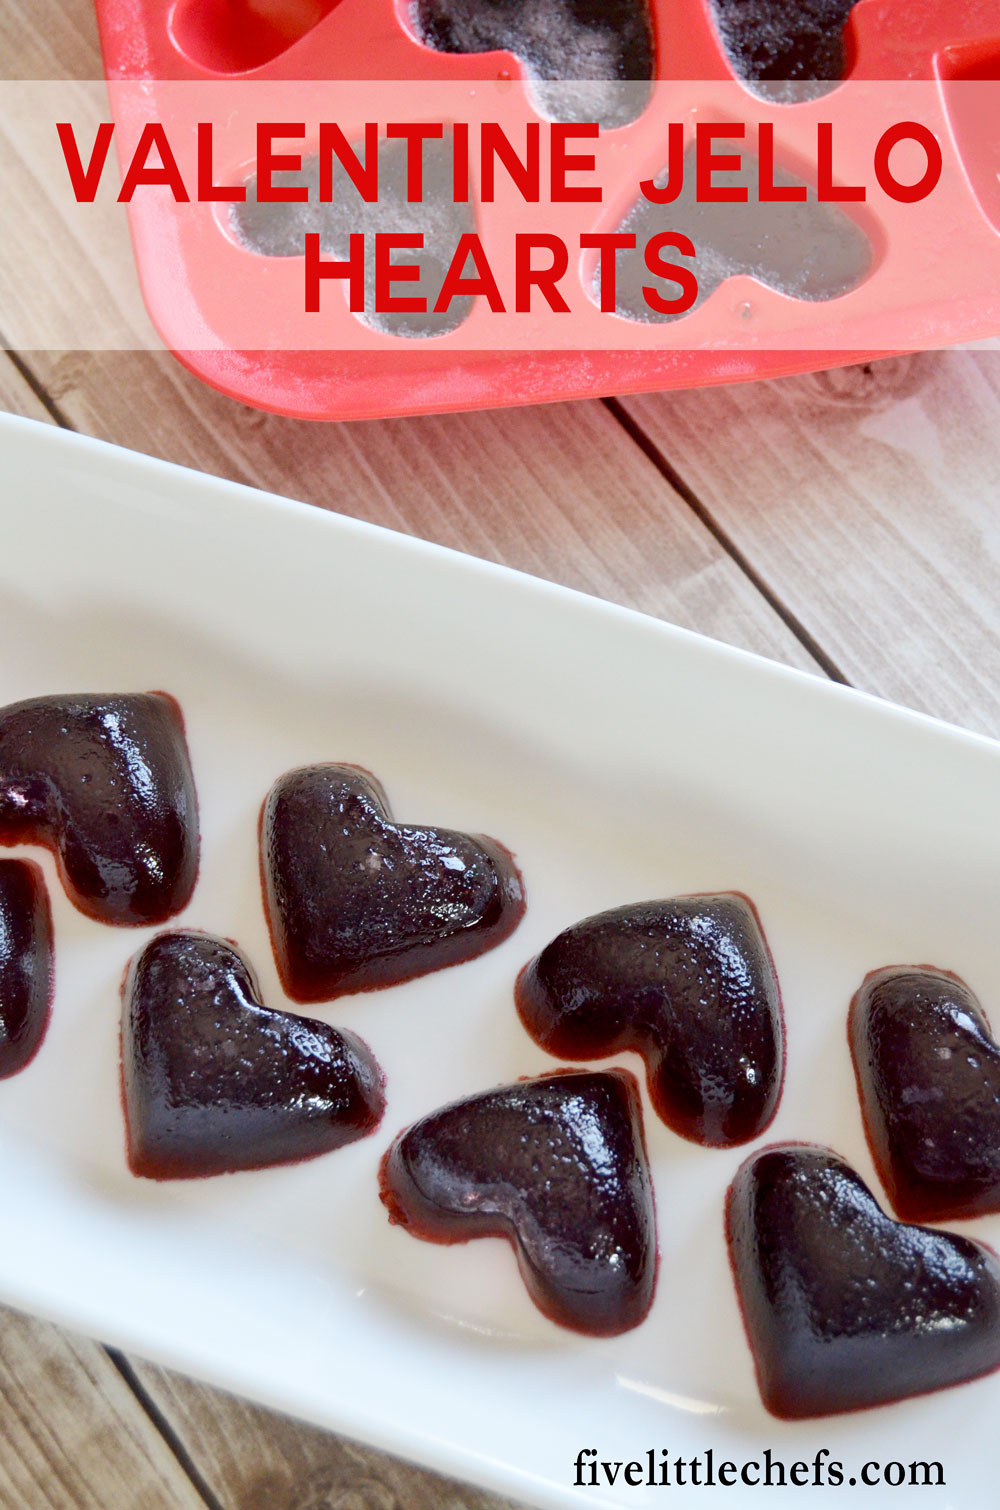 Valentine Jello Hearts is a kid friendly dessert. Valentine's Day wouldn't be fun without heart shaped treats.